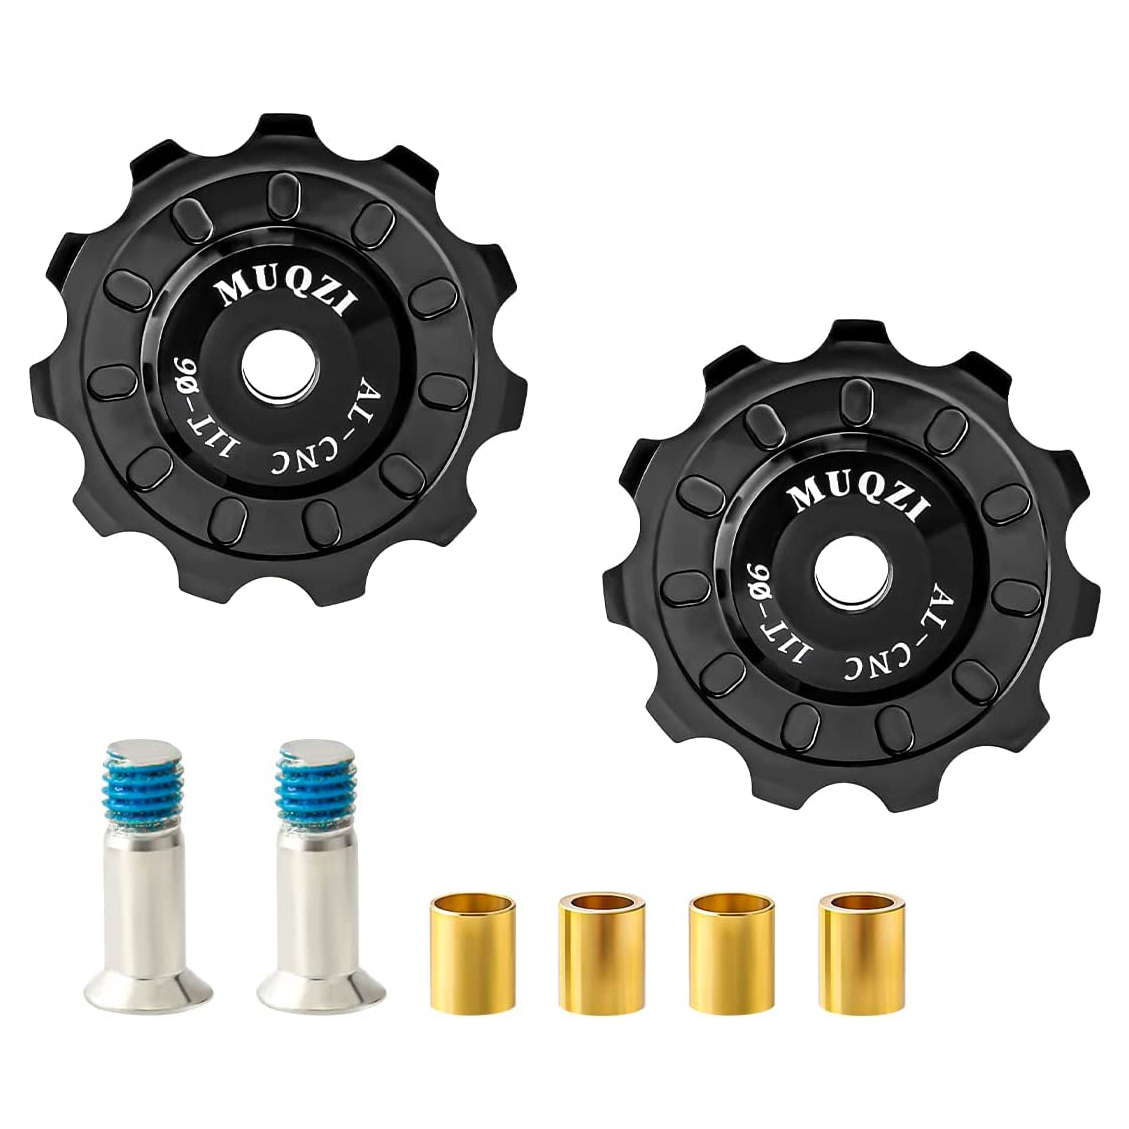 How To Select The Perfect Plastic Pulley Wheels For Your Application: The 10 Essential Factors